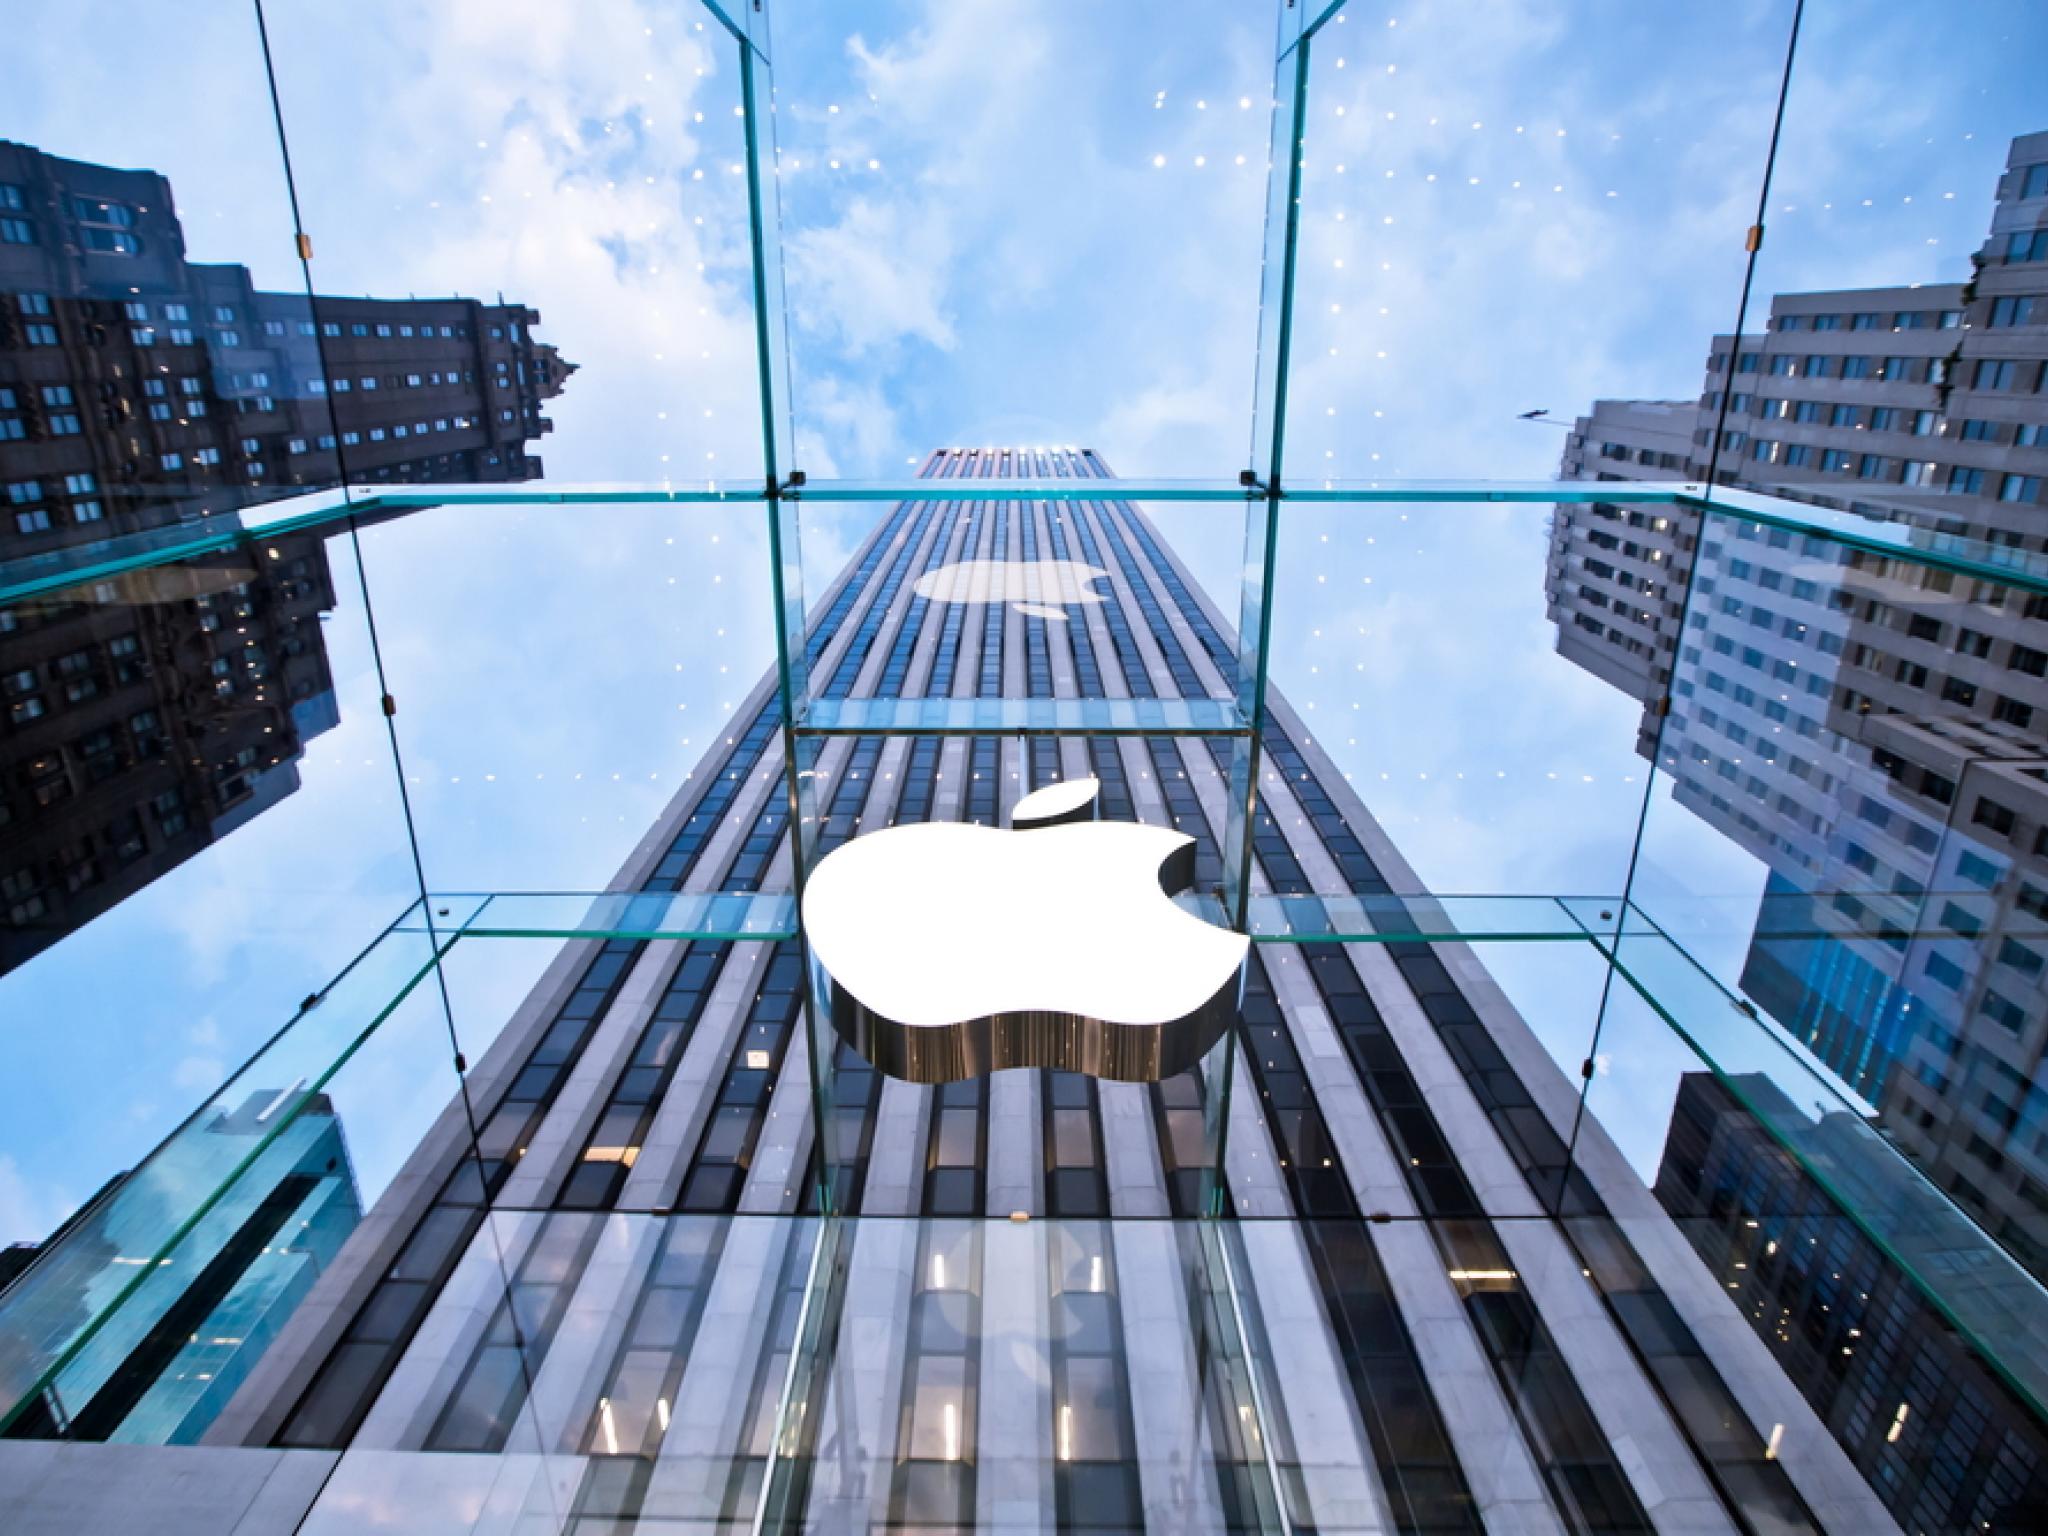  apple-suppliers-see-share-price-drop-as-barclays-downgrades-iphone-maker 